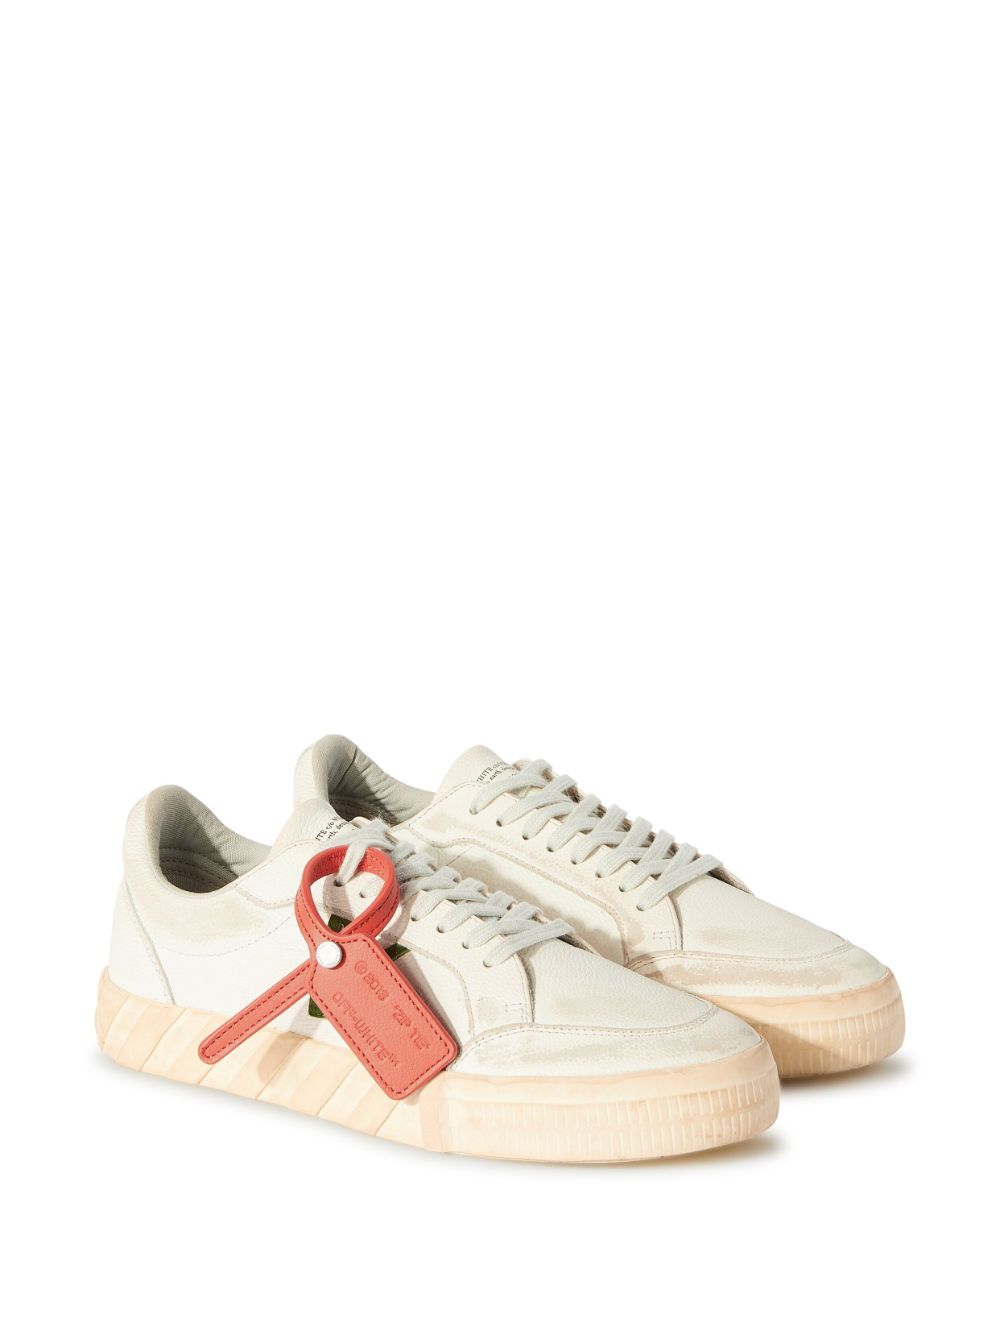 Off-White Low Vulcanized Distressed Sneakers - Farfetch